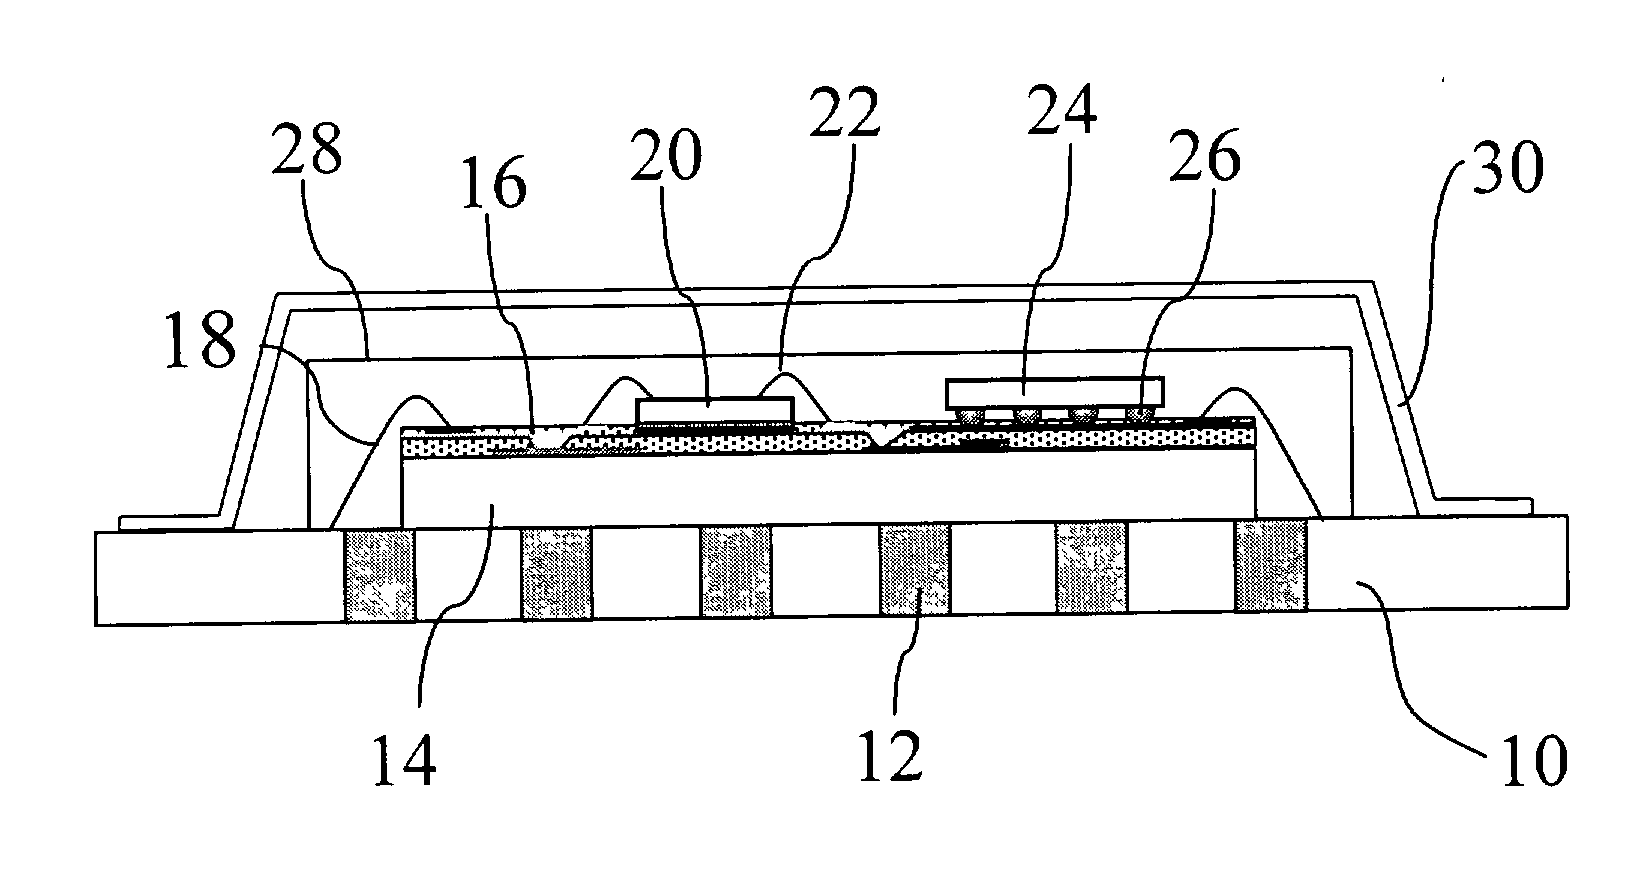 System-in-a-package device